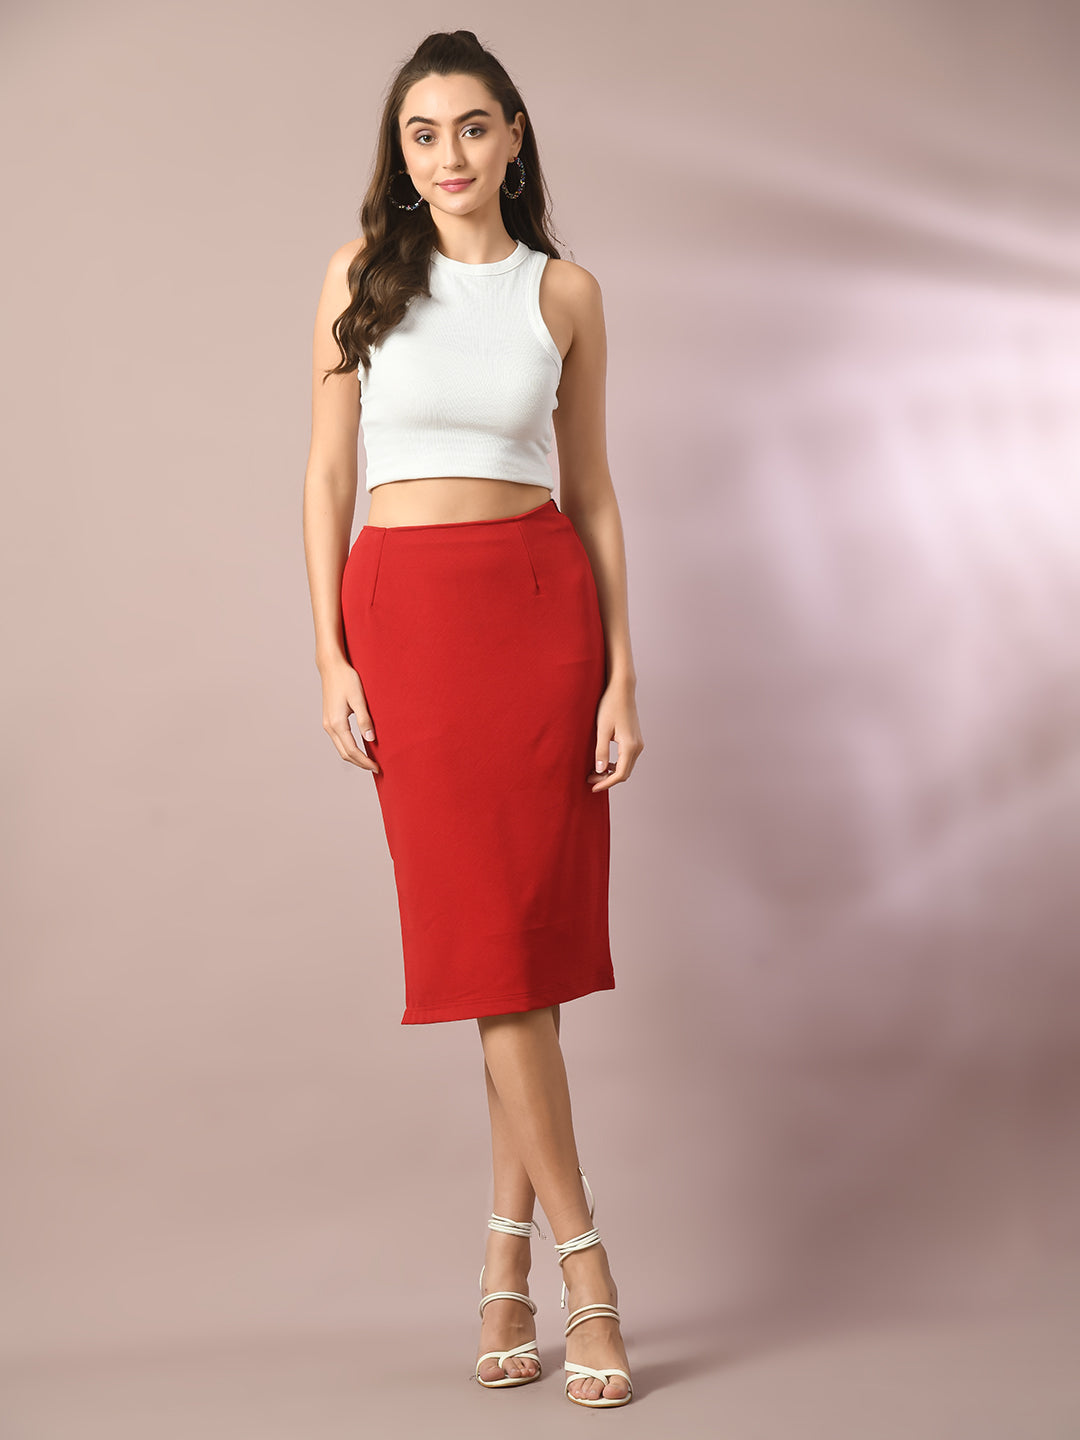 Women's  Red Solid Knee Length Party Embellished Skirts   - Myshka